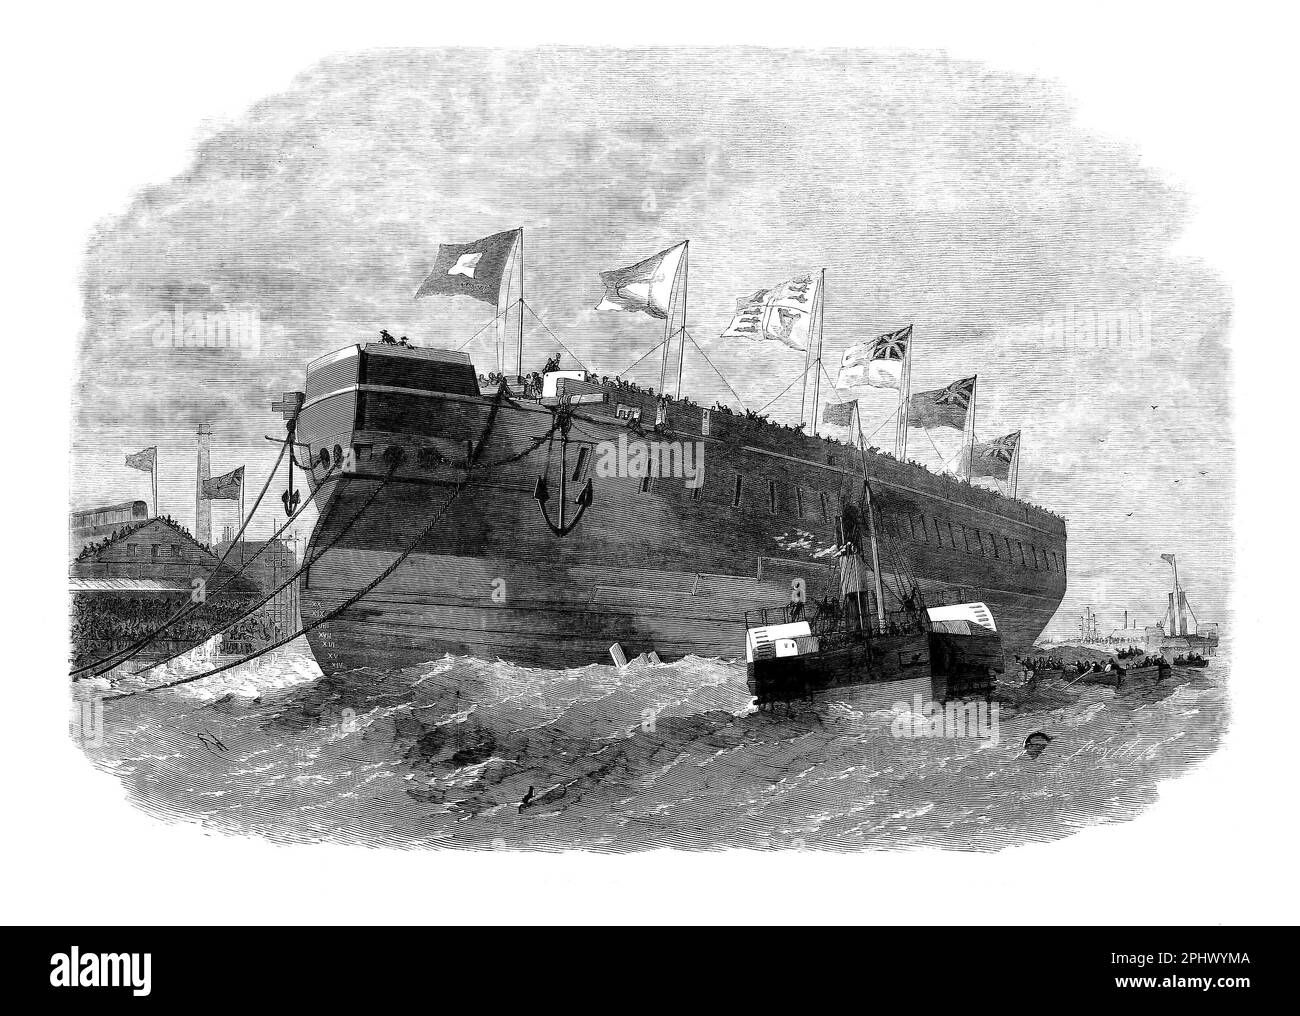 The launch of the 50 gun screw steam ship 'Minotaur' from the Thames Iron Shipbuilding Company's yard at Blackwall, London, England. She served in the Mediterranean and during the 1882 Egyptian War, but spent the bulk of her active career as flagship of the Channel Fleet. Stock Photo